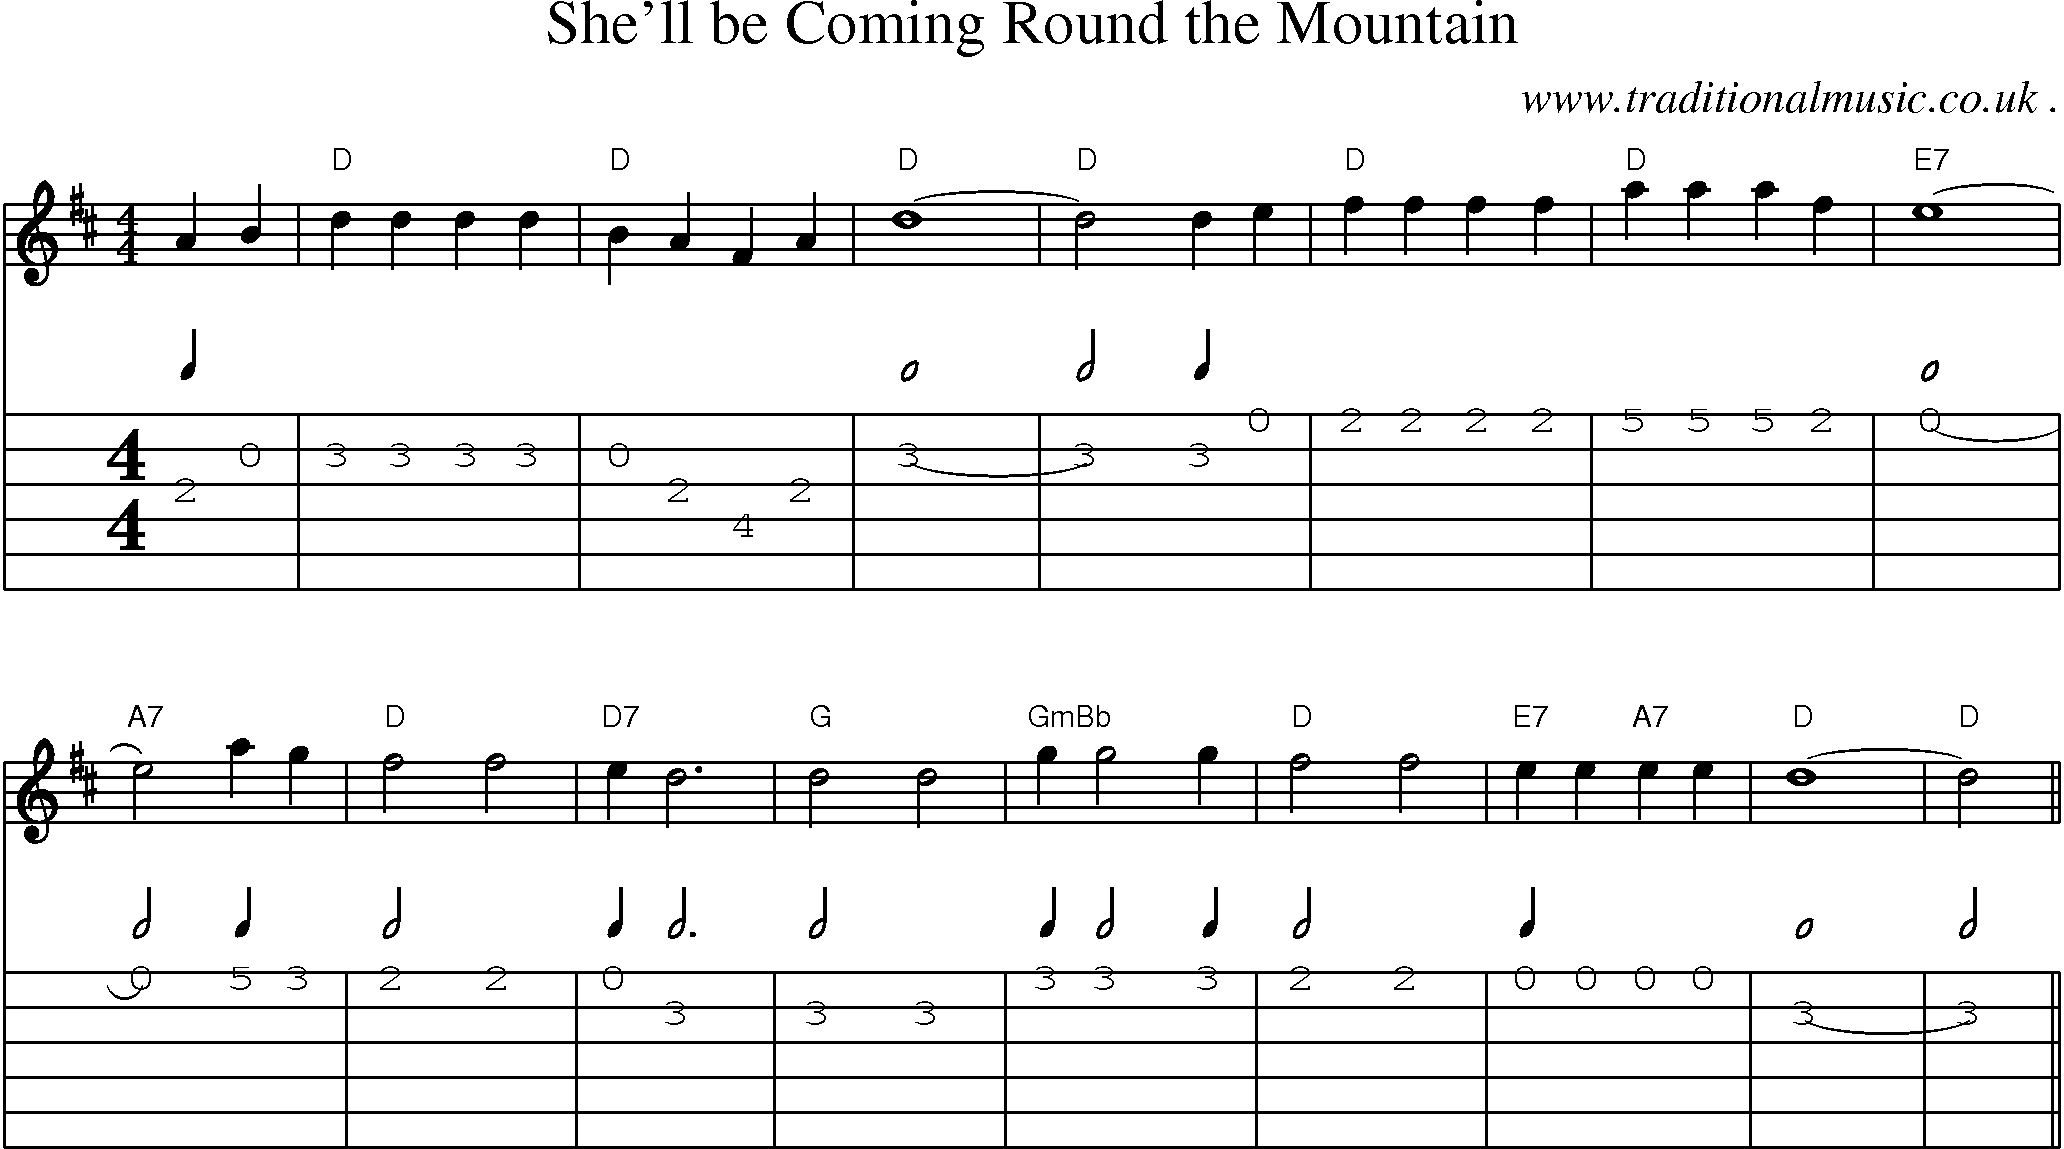 Sheet-Music and Guitar Tabs for Shell Be Coming Round The Mountain